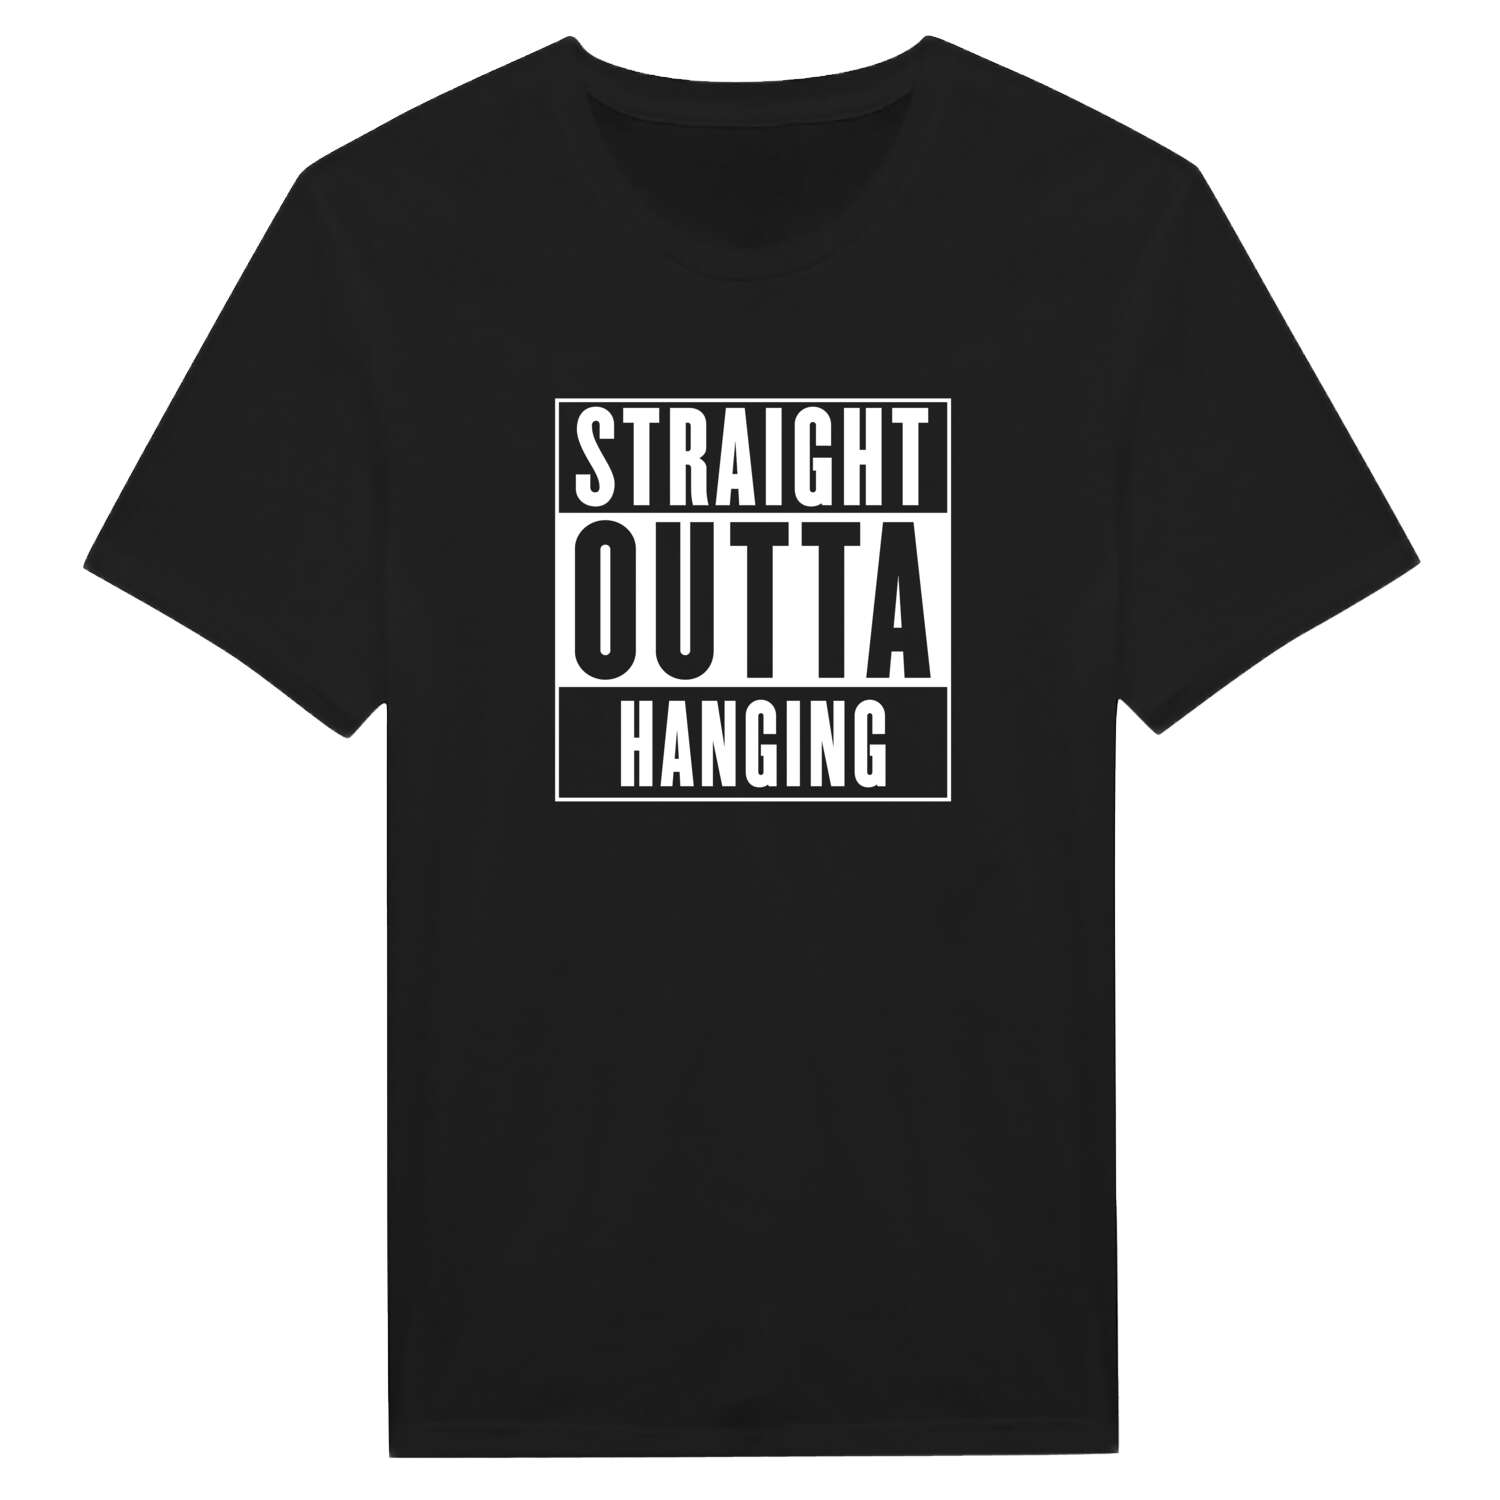 Hanging T-Shirt »Straight Outta«